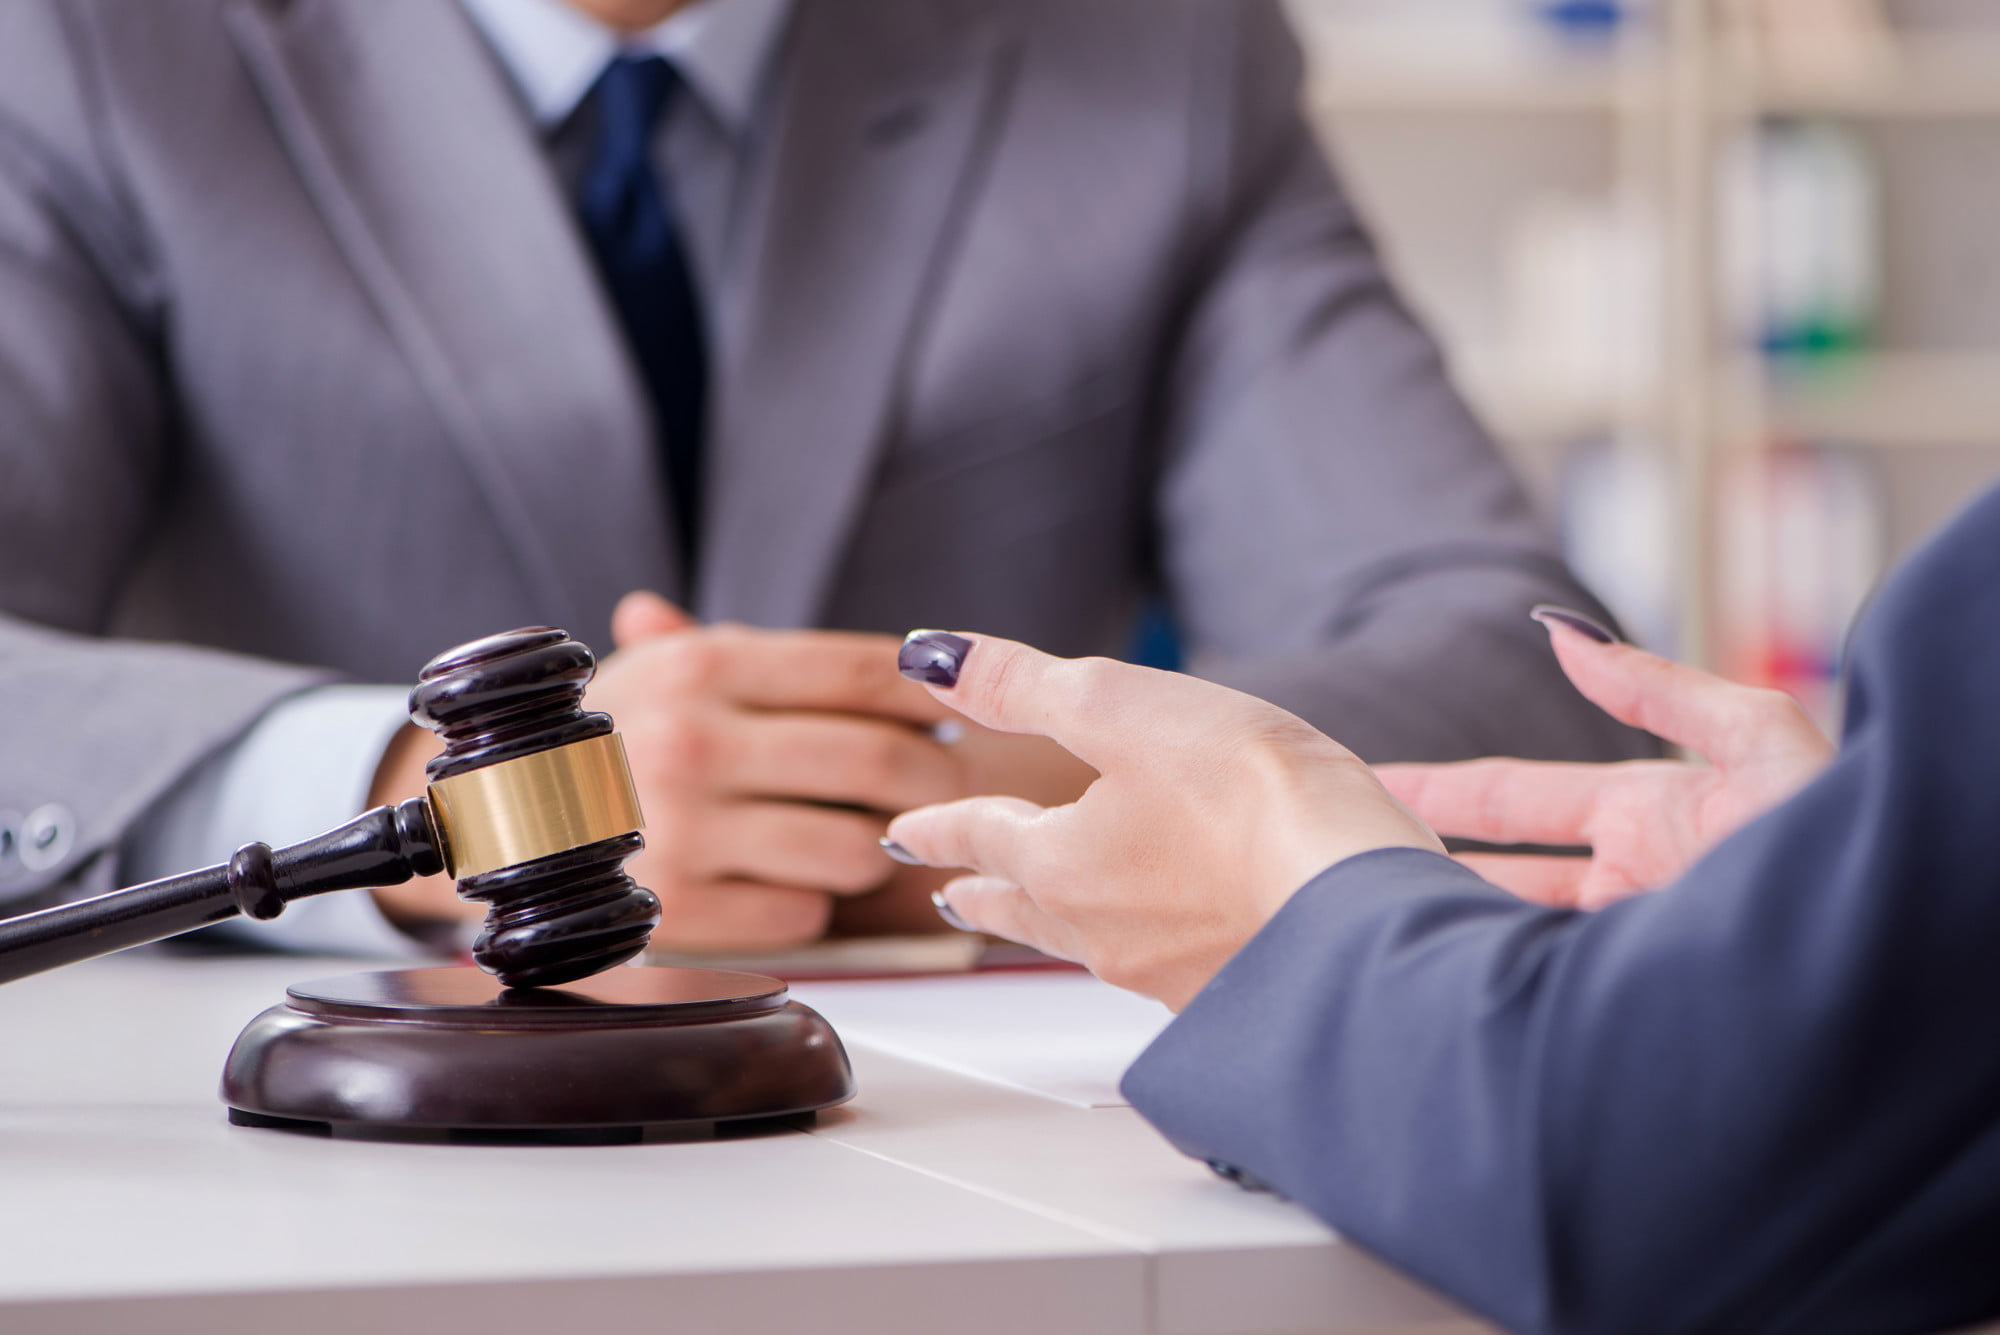 What do you know about civil litigations? You can read about choosing a civil litigation attorney in this detailed overview.